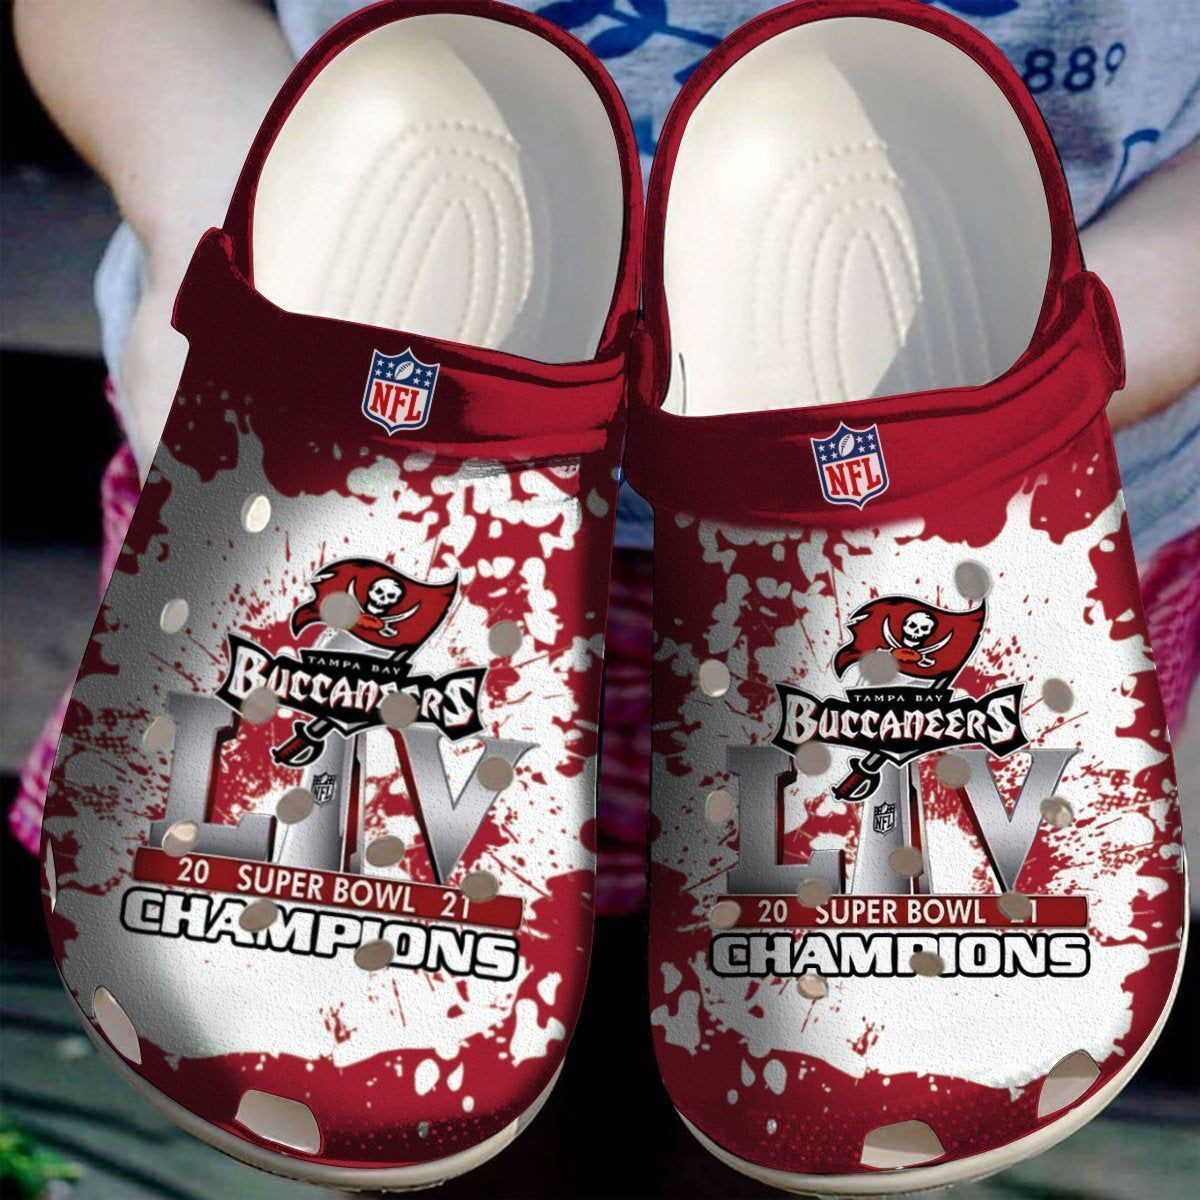 Tampa Bay Buccaneers Logo Pattern Crocs Classic Clogs Shoes In Red & White